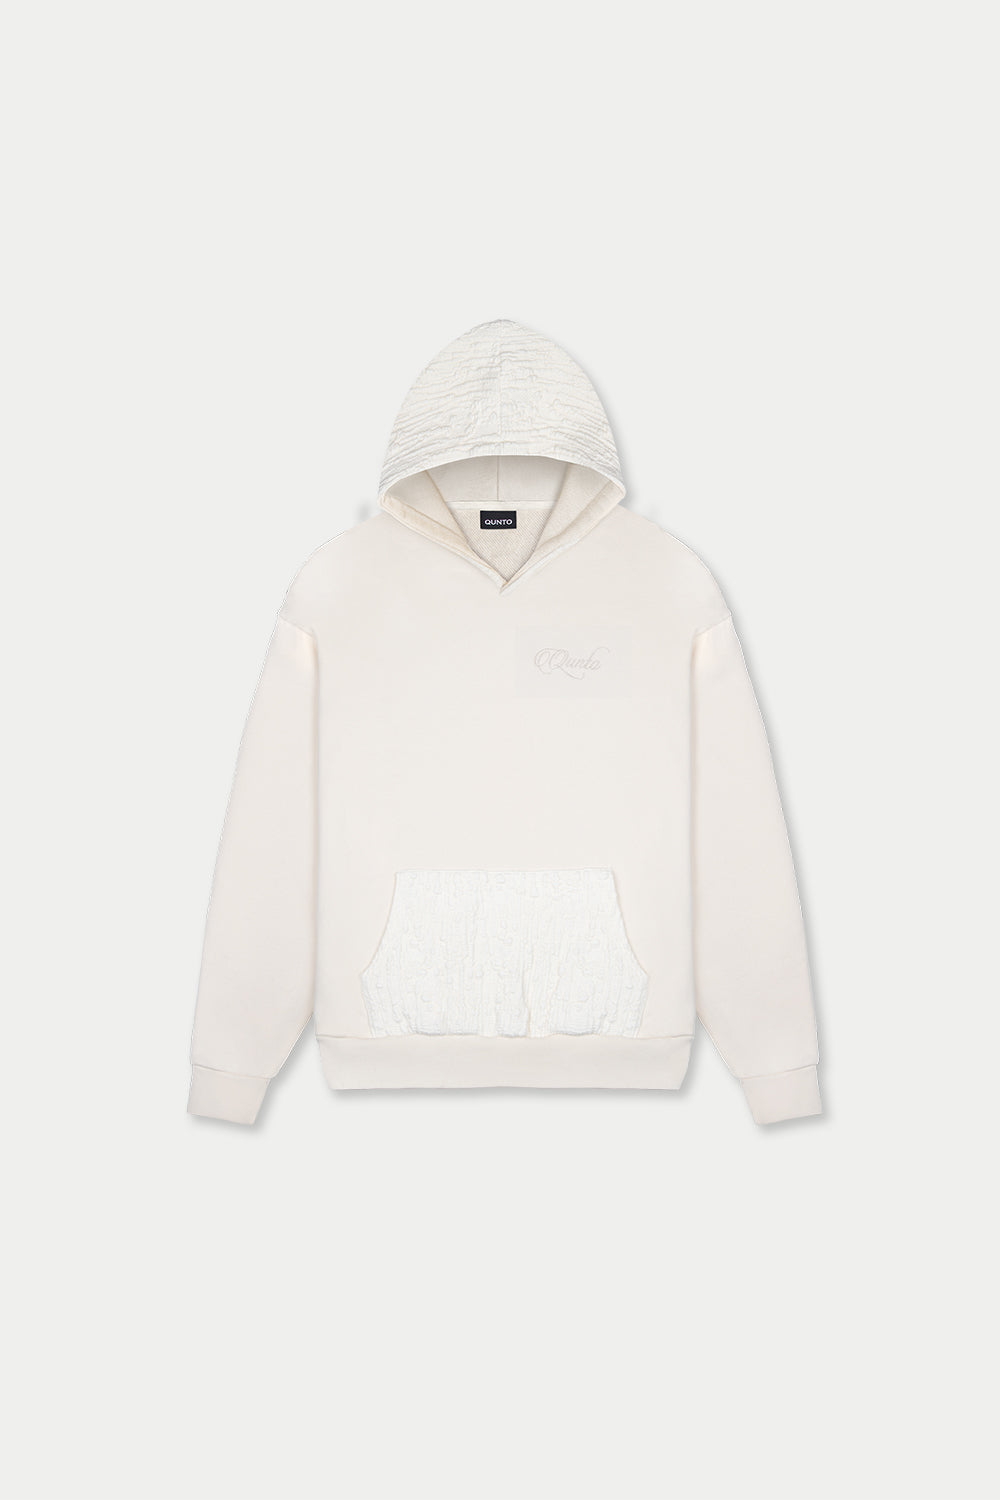 TWO STRUCTURE CREAM HOODIE